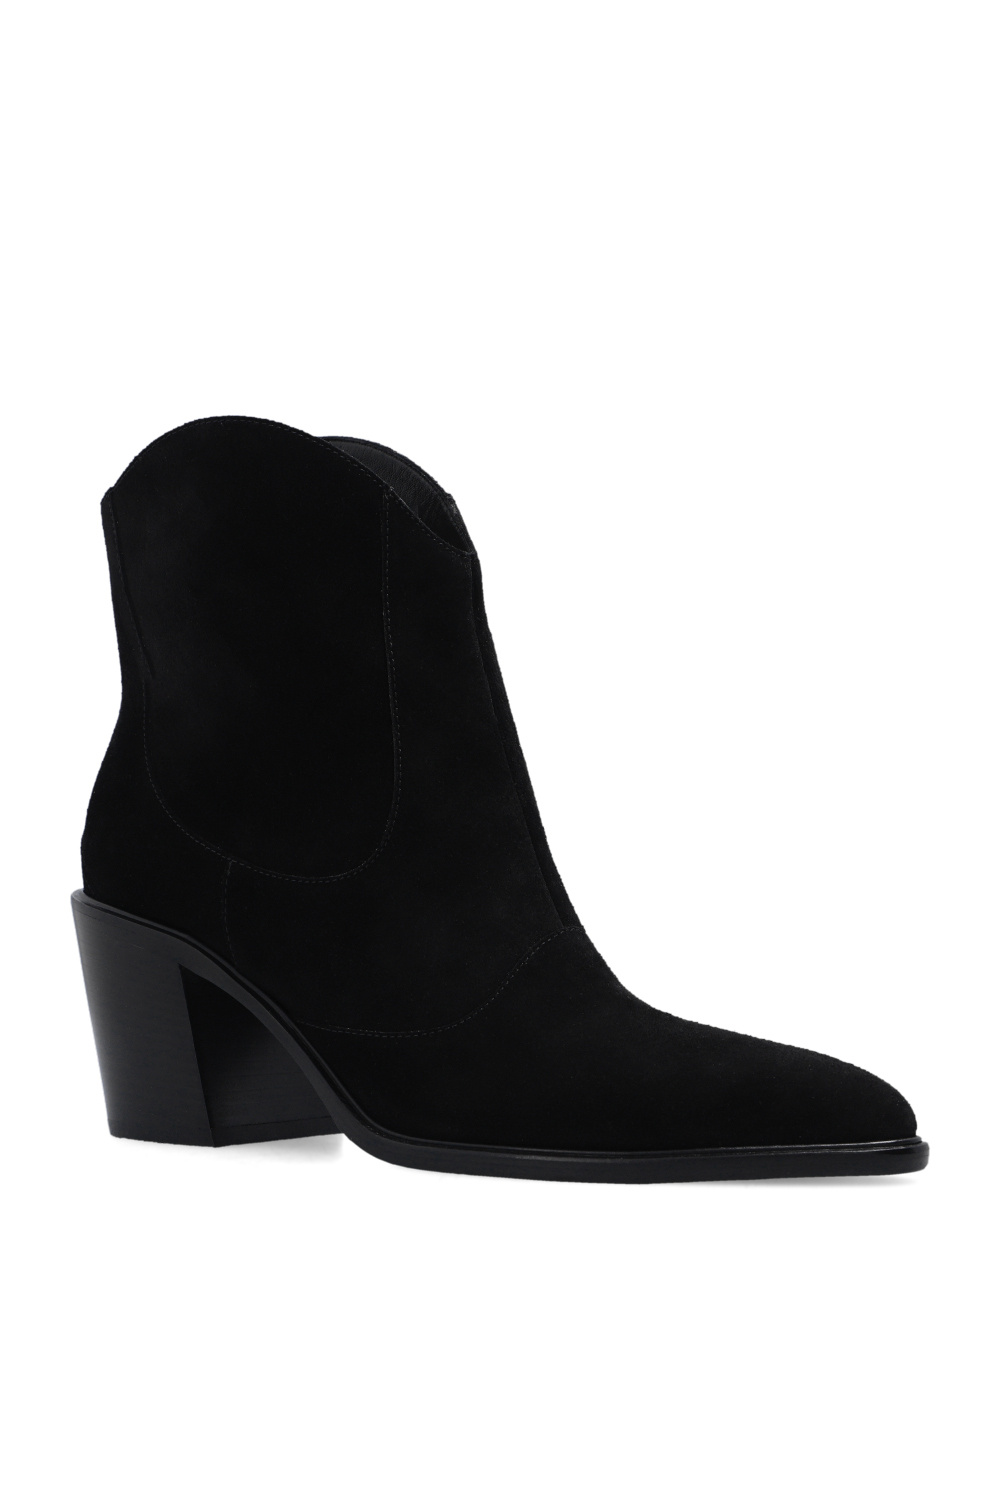 Jimmy Choo ‘Cynthi’ heeled ankle boots